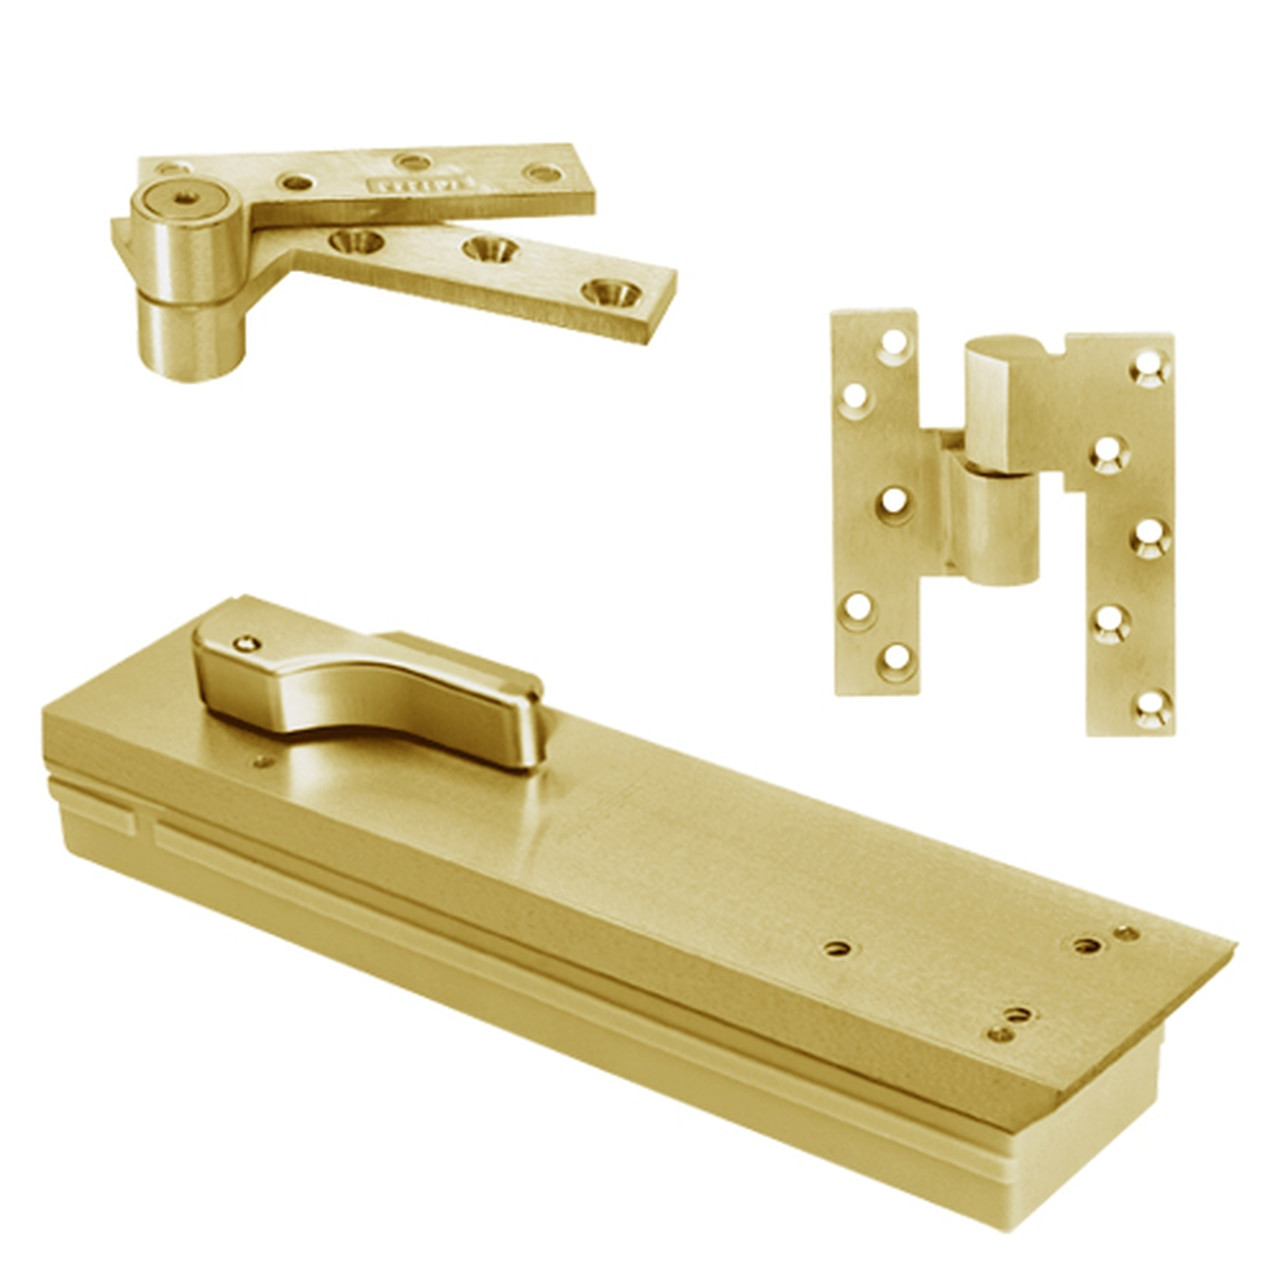 FQ5105NBC-SC-RH-606 Rixson Q51 Series Fire Rated 3/4" Offset Hung Shallow Depth Floor Closers in Satin Brass Finish